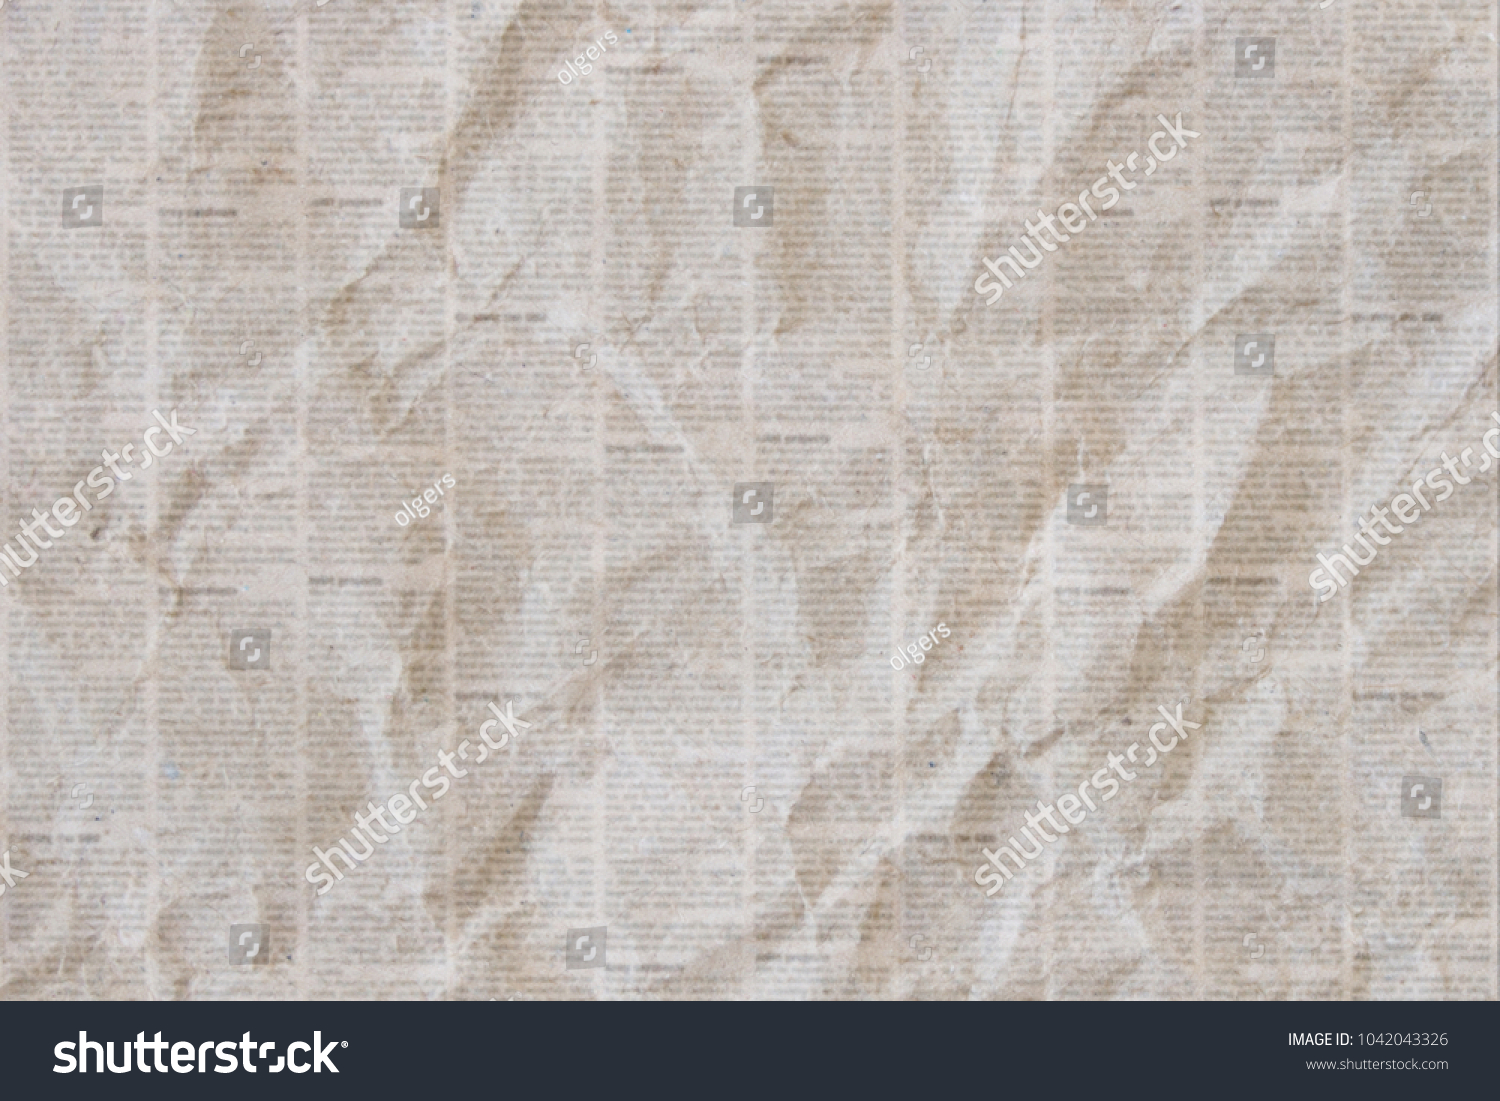 Old crumpled grunge newspaper paper texture background. Blurred vintage newspaper background. Crumpled paper textured page. Gray brown beige collage news paper background. #1042043326